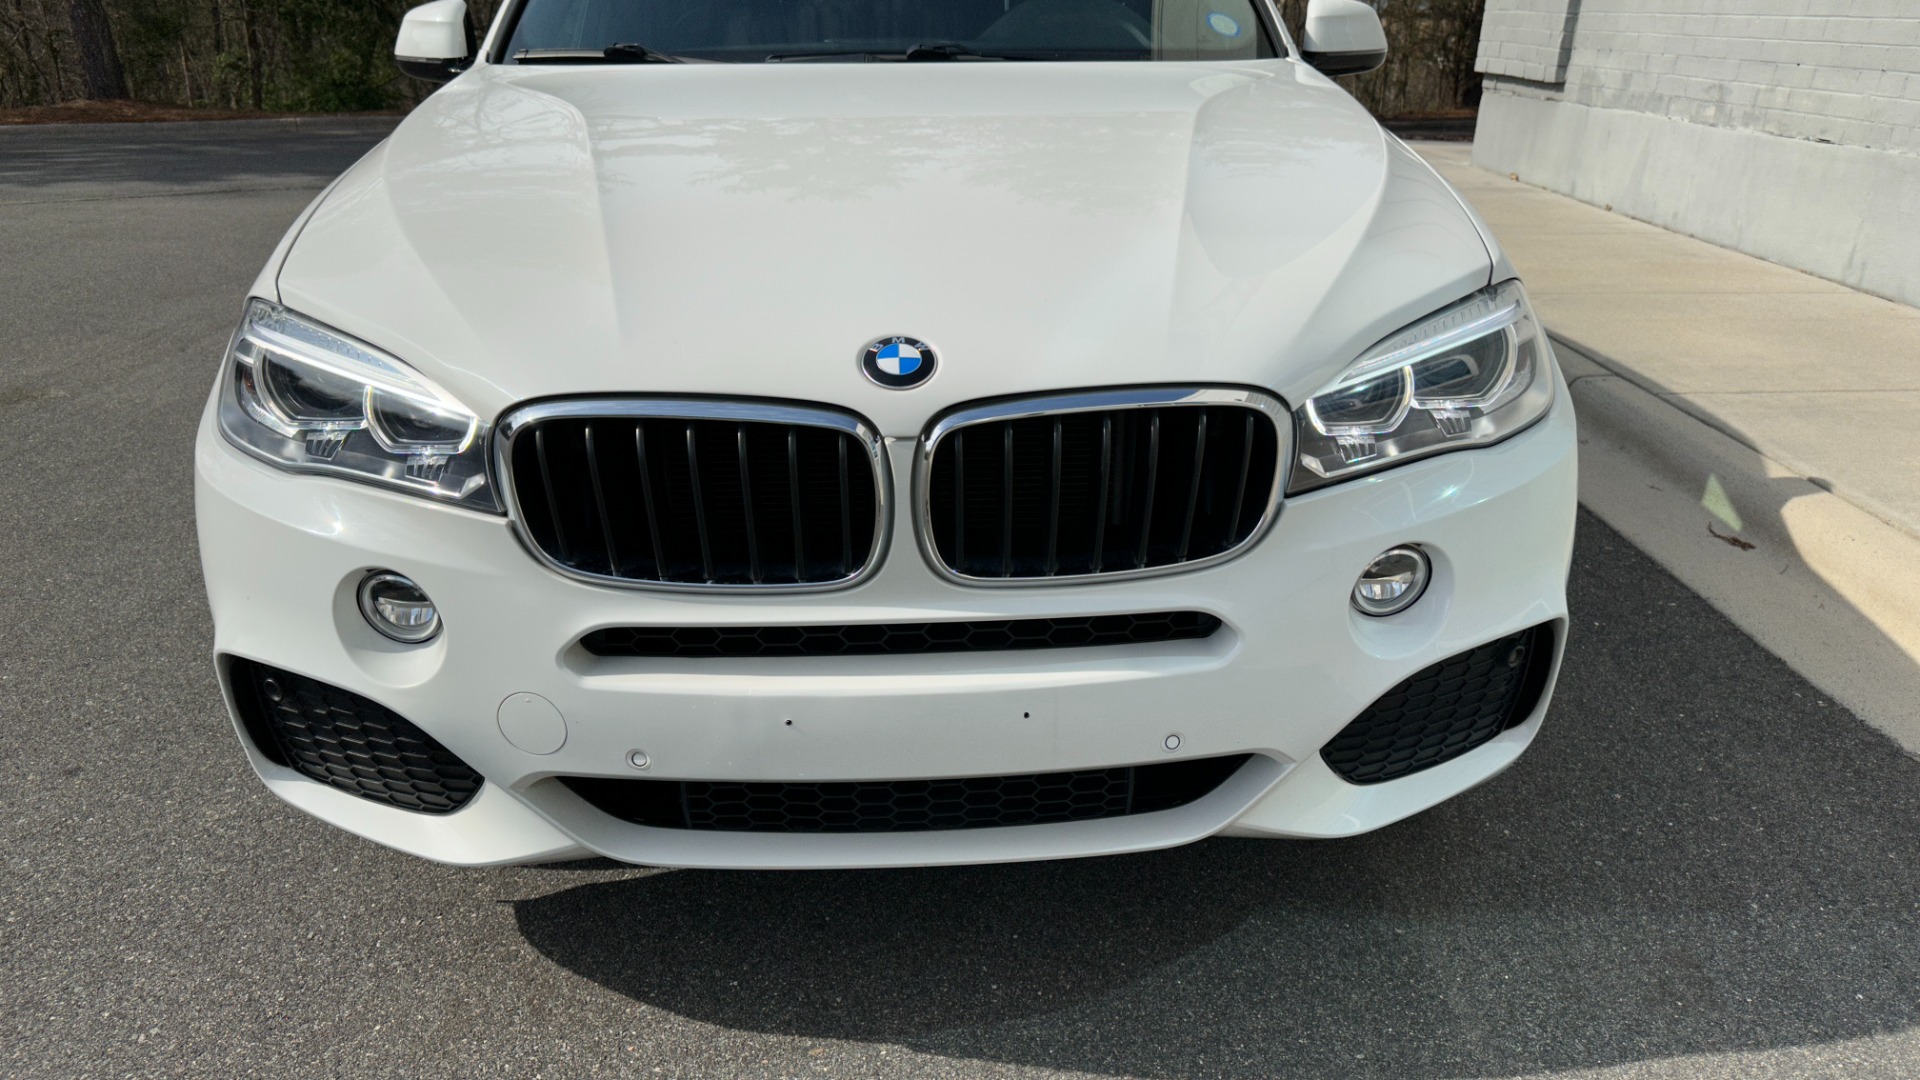 Used 2018 BMW X5 XDRIVE35I / M-SPORT / NAV / SUNROOF / H/K SND / REARVIEW for sale Sold at Formula Imports in Charlotte NC 28227 9